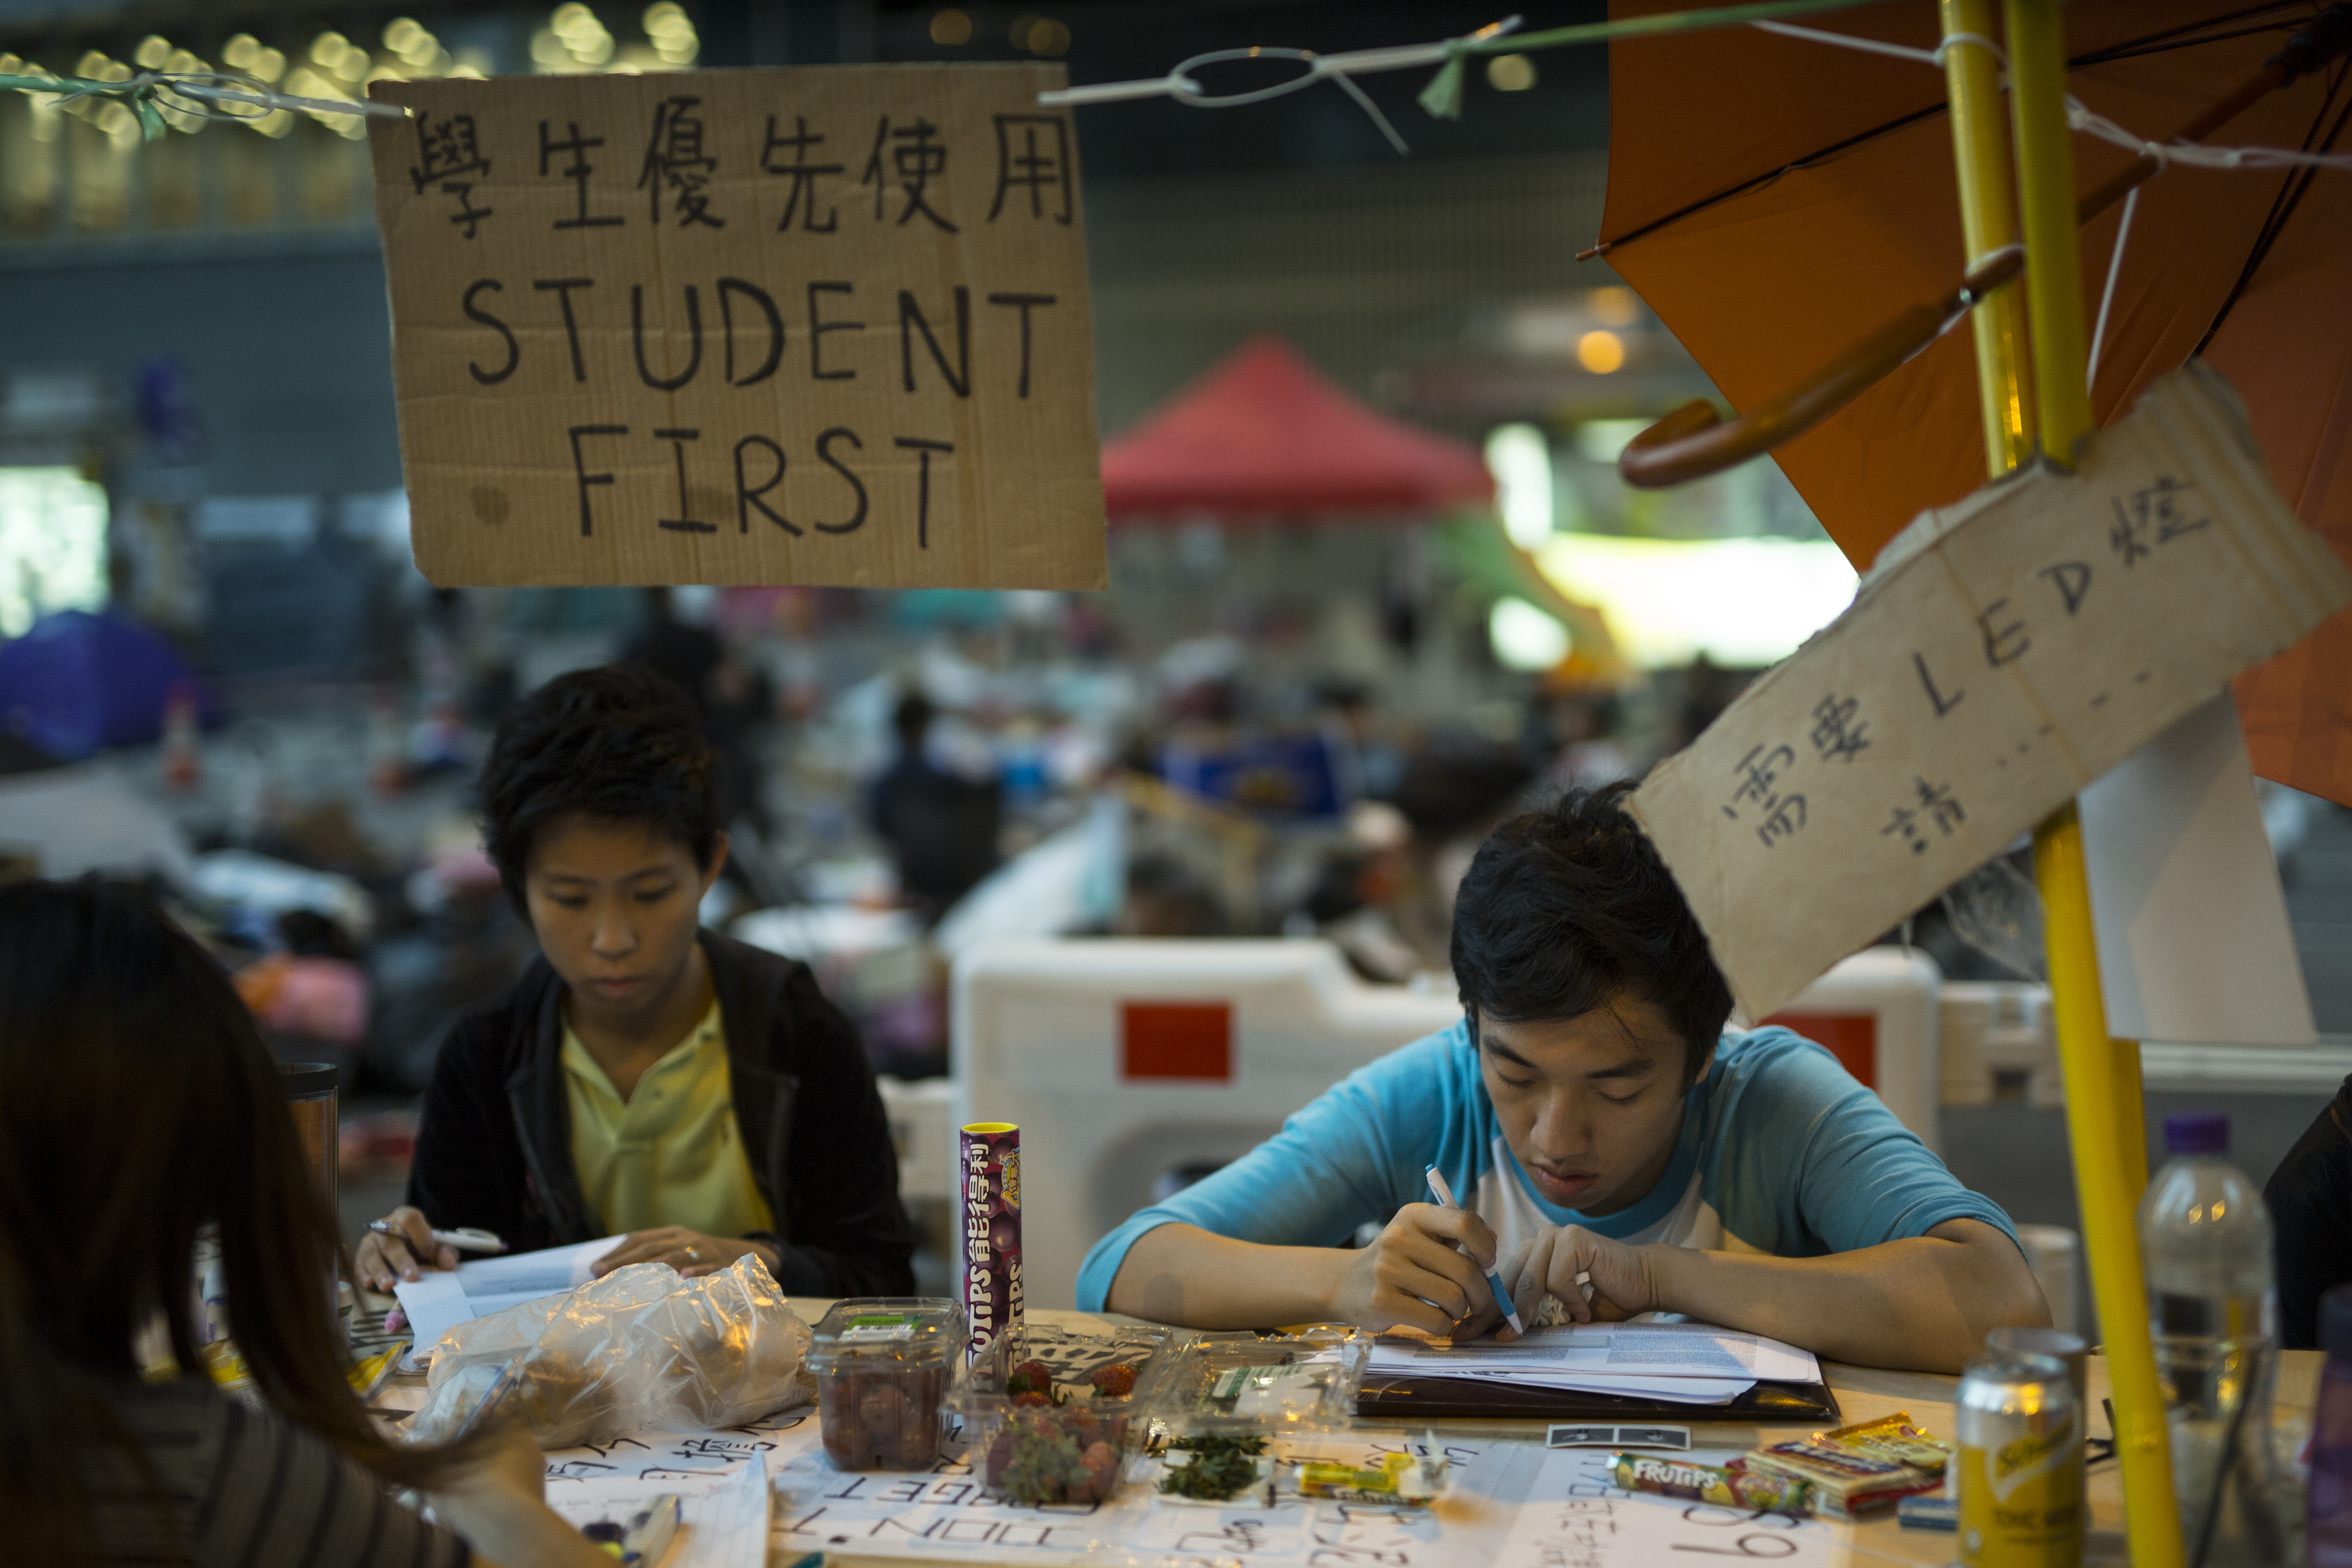 Students do their homework at a study area at the protest site in Hong Kong on Oct. 10, 2014 (Paula Bronstein—Getty Images)